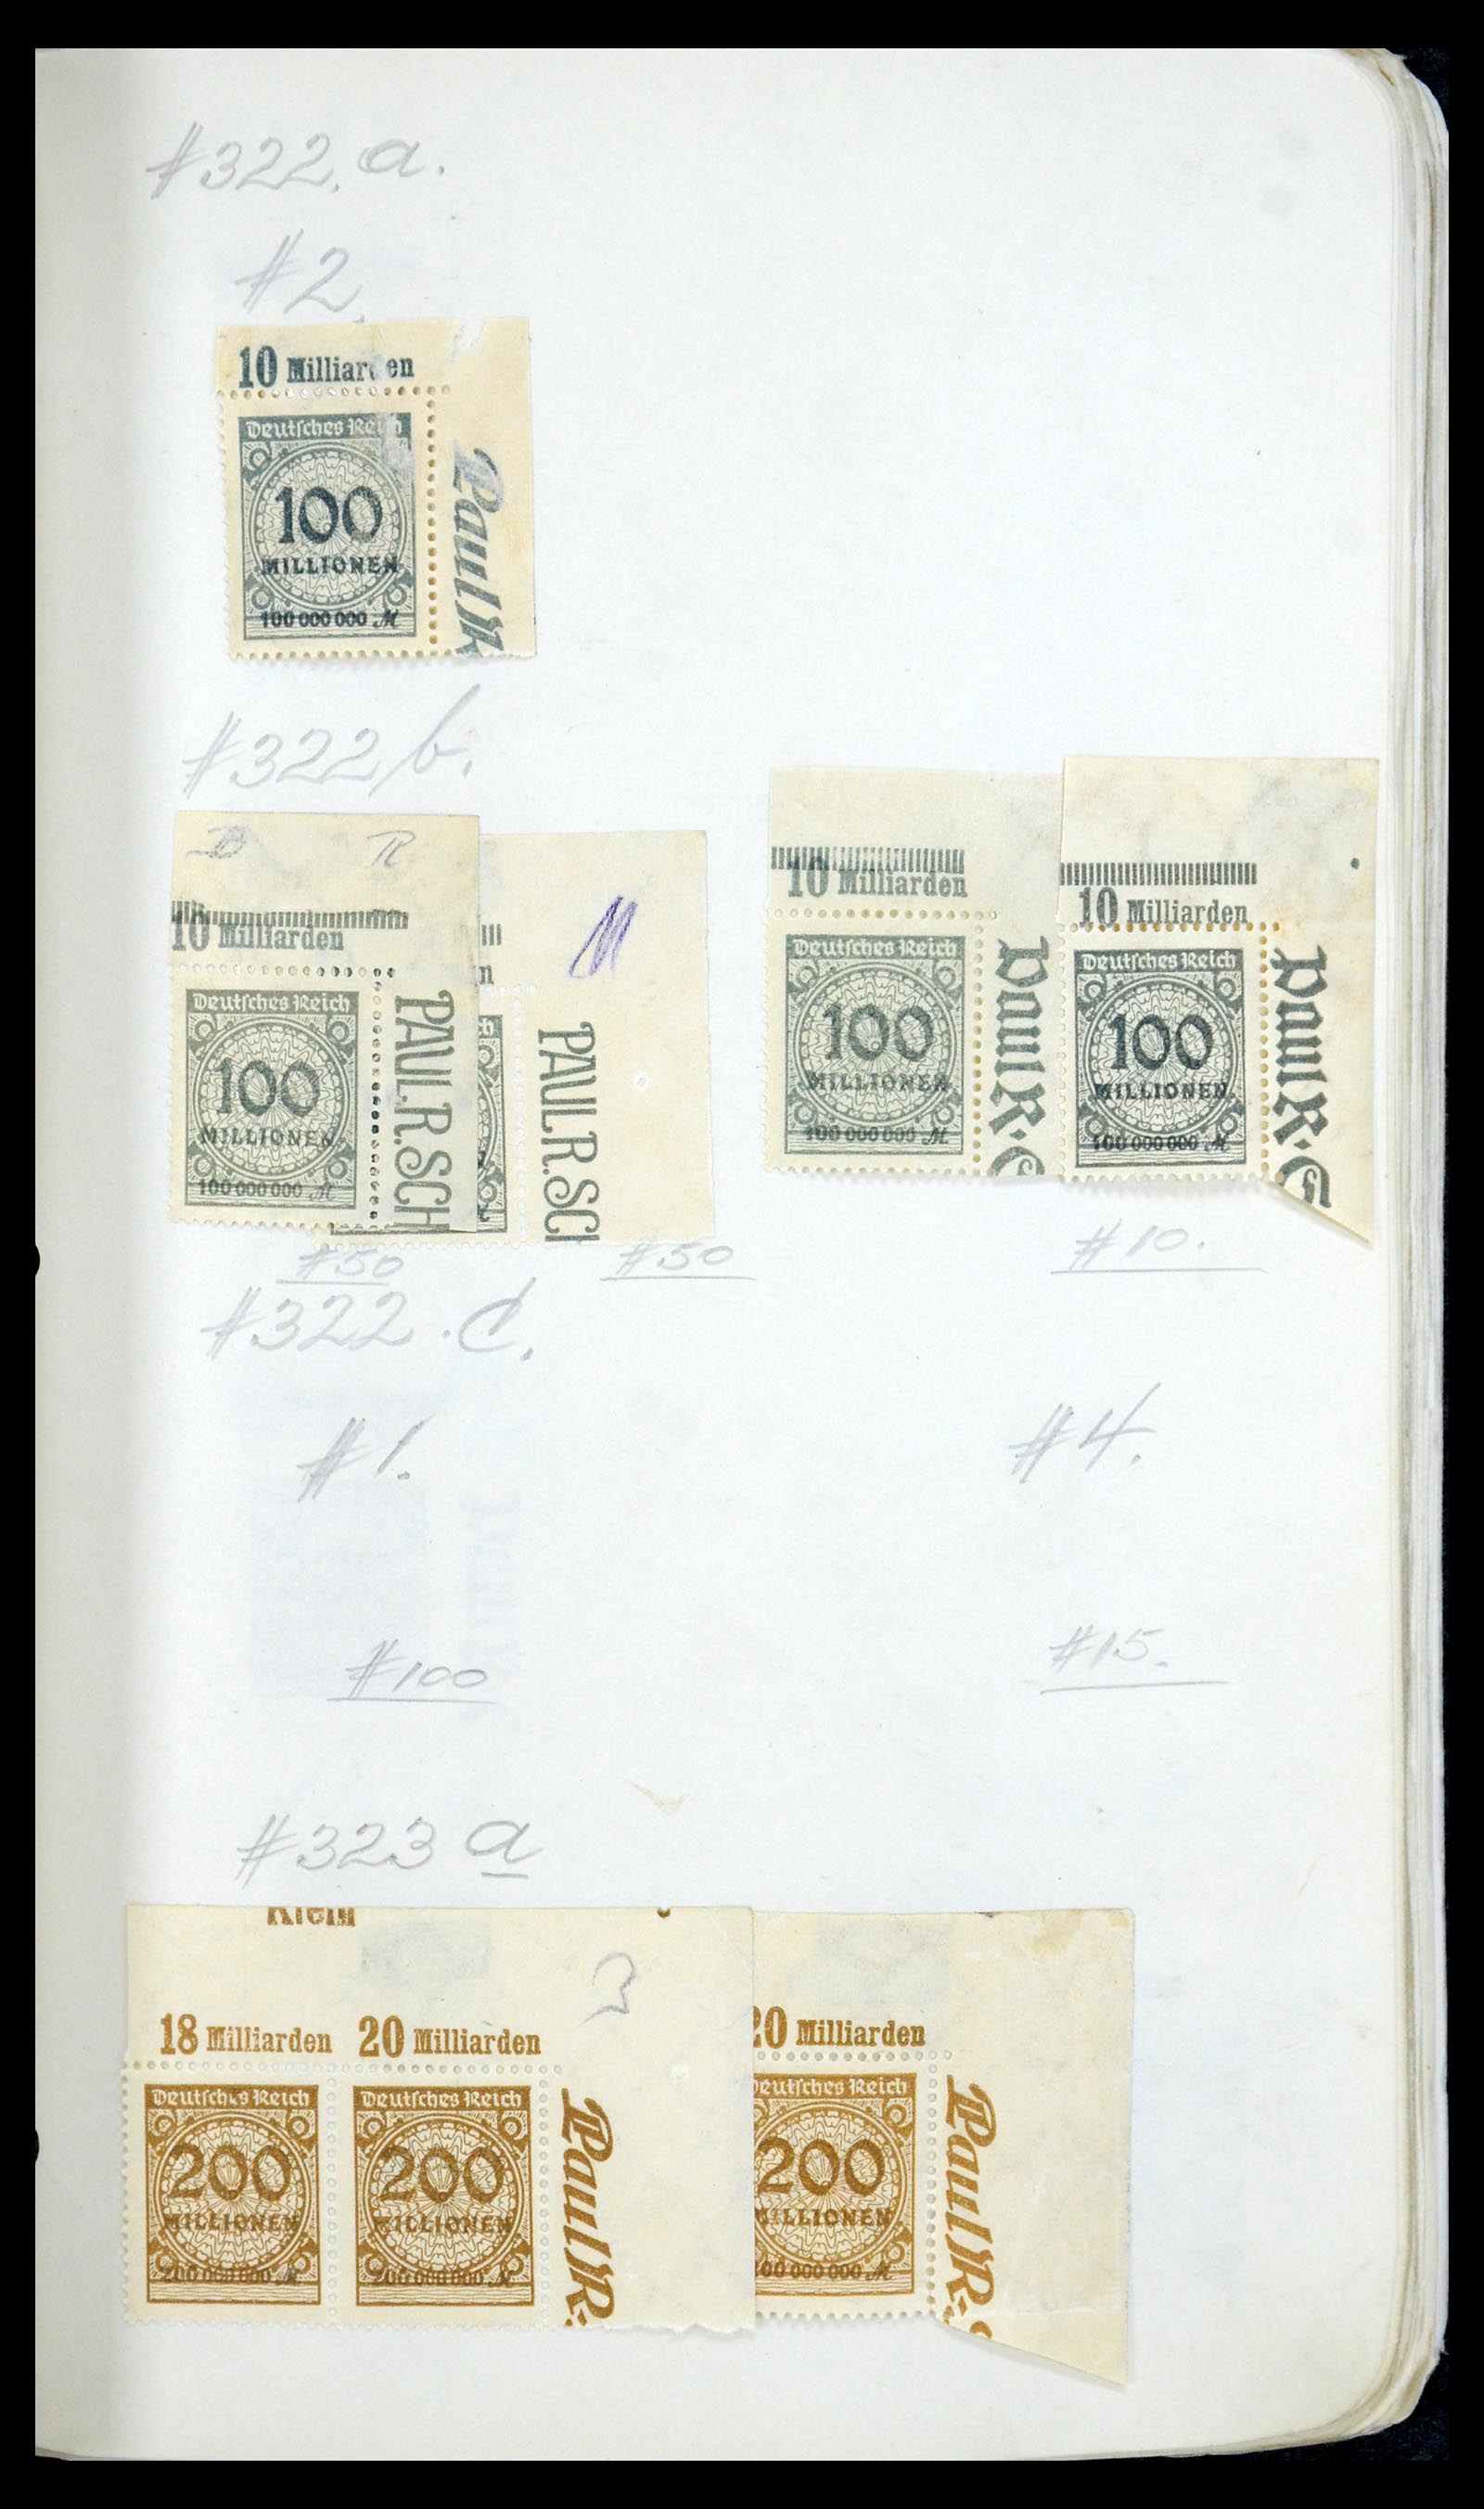 35565 030 - Stamp Collection 35565 German Reich infla 1919-1923.